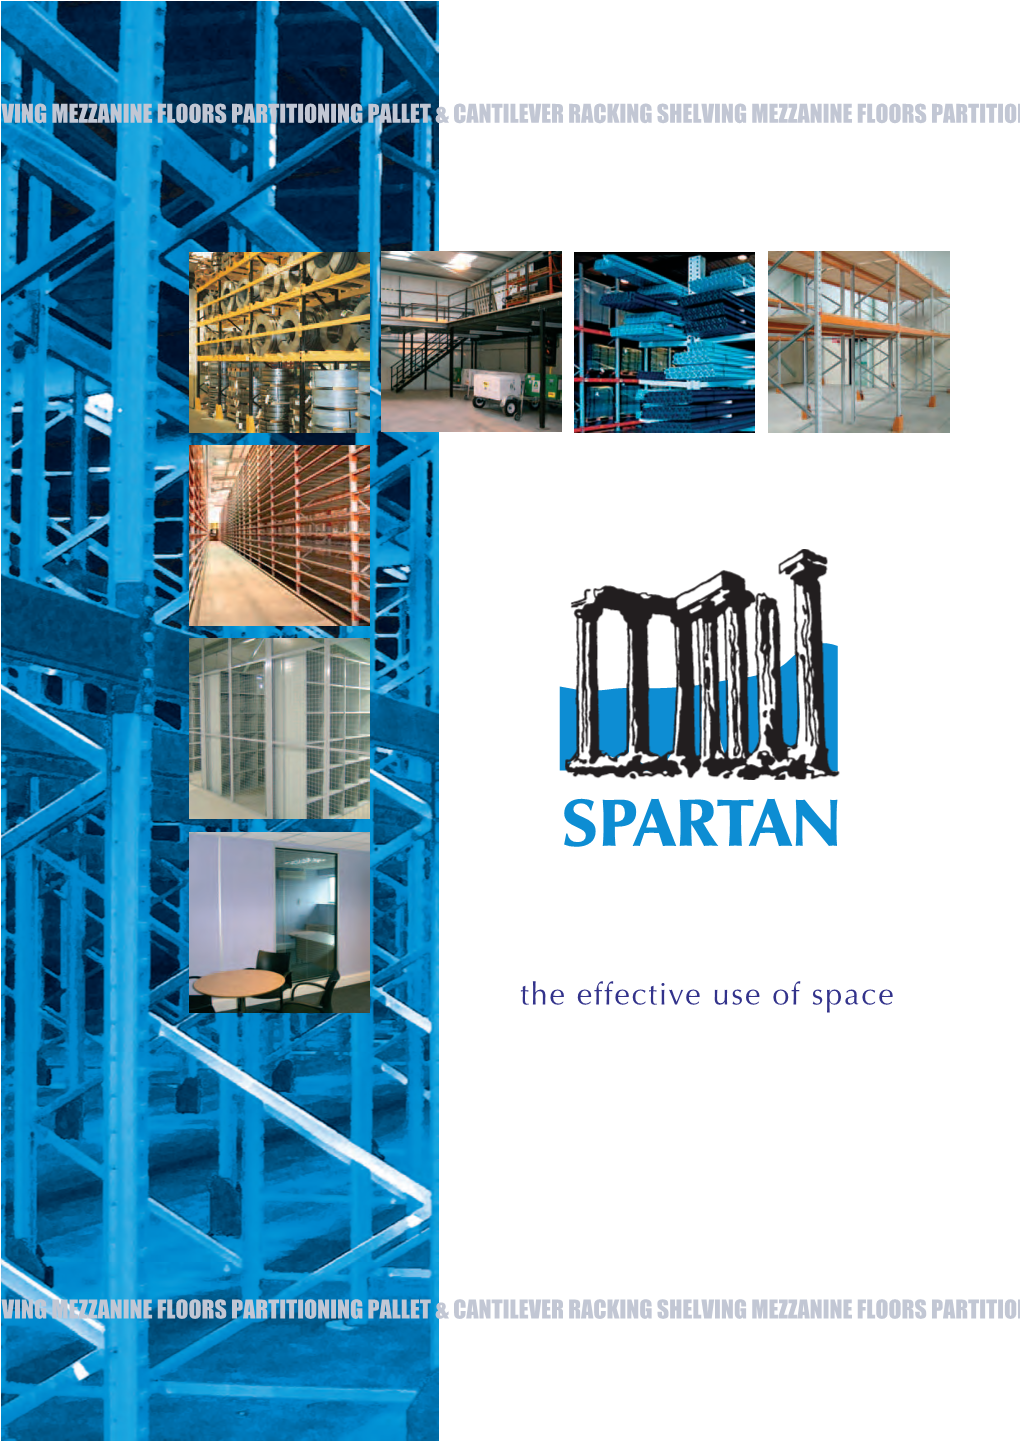 Spartan Direct Is at the Leading Edge of Space Technology – the Technology of Maximising and Organising Space